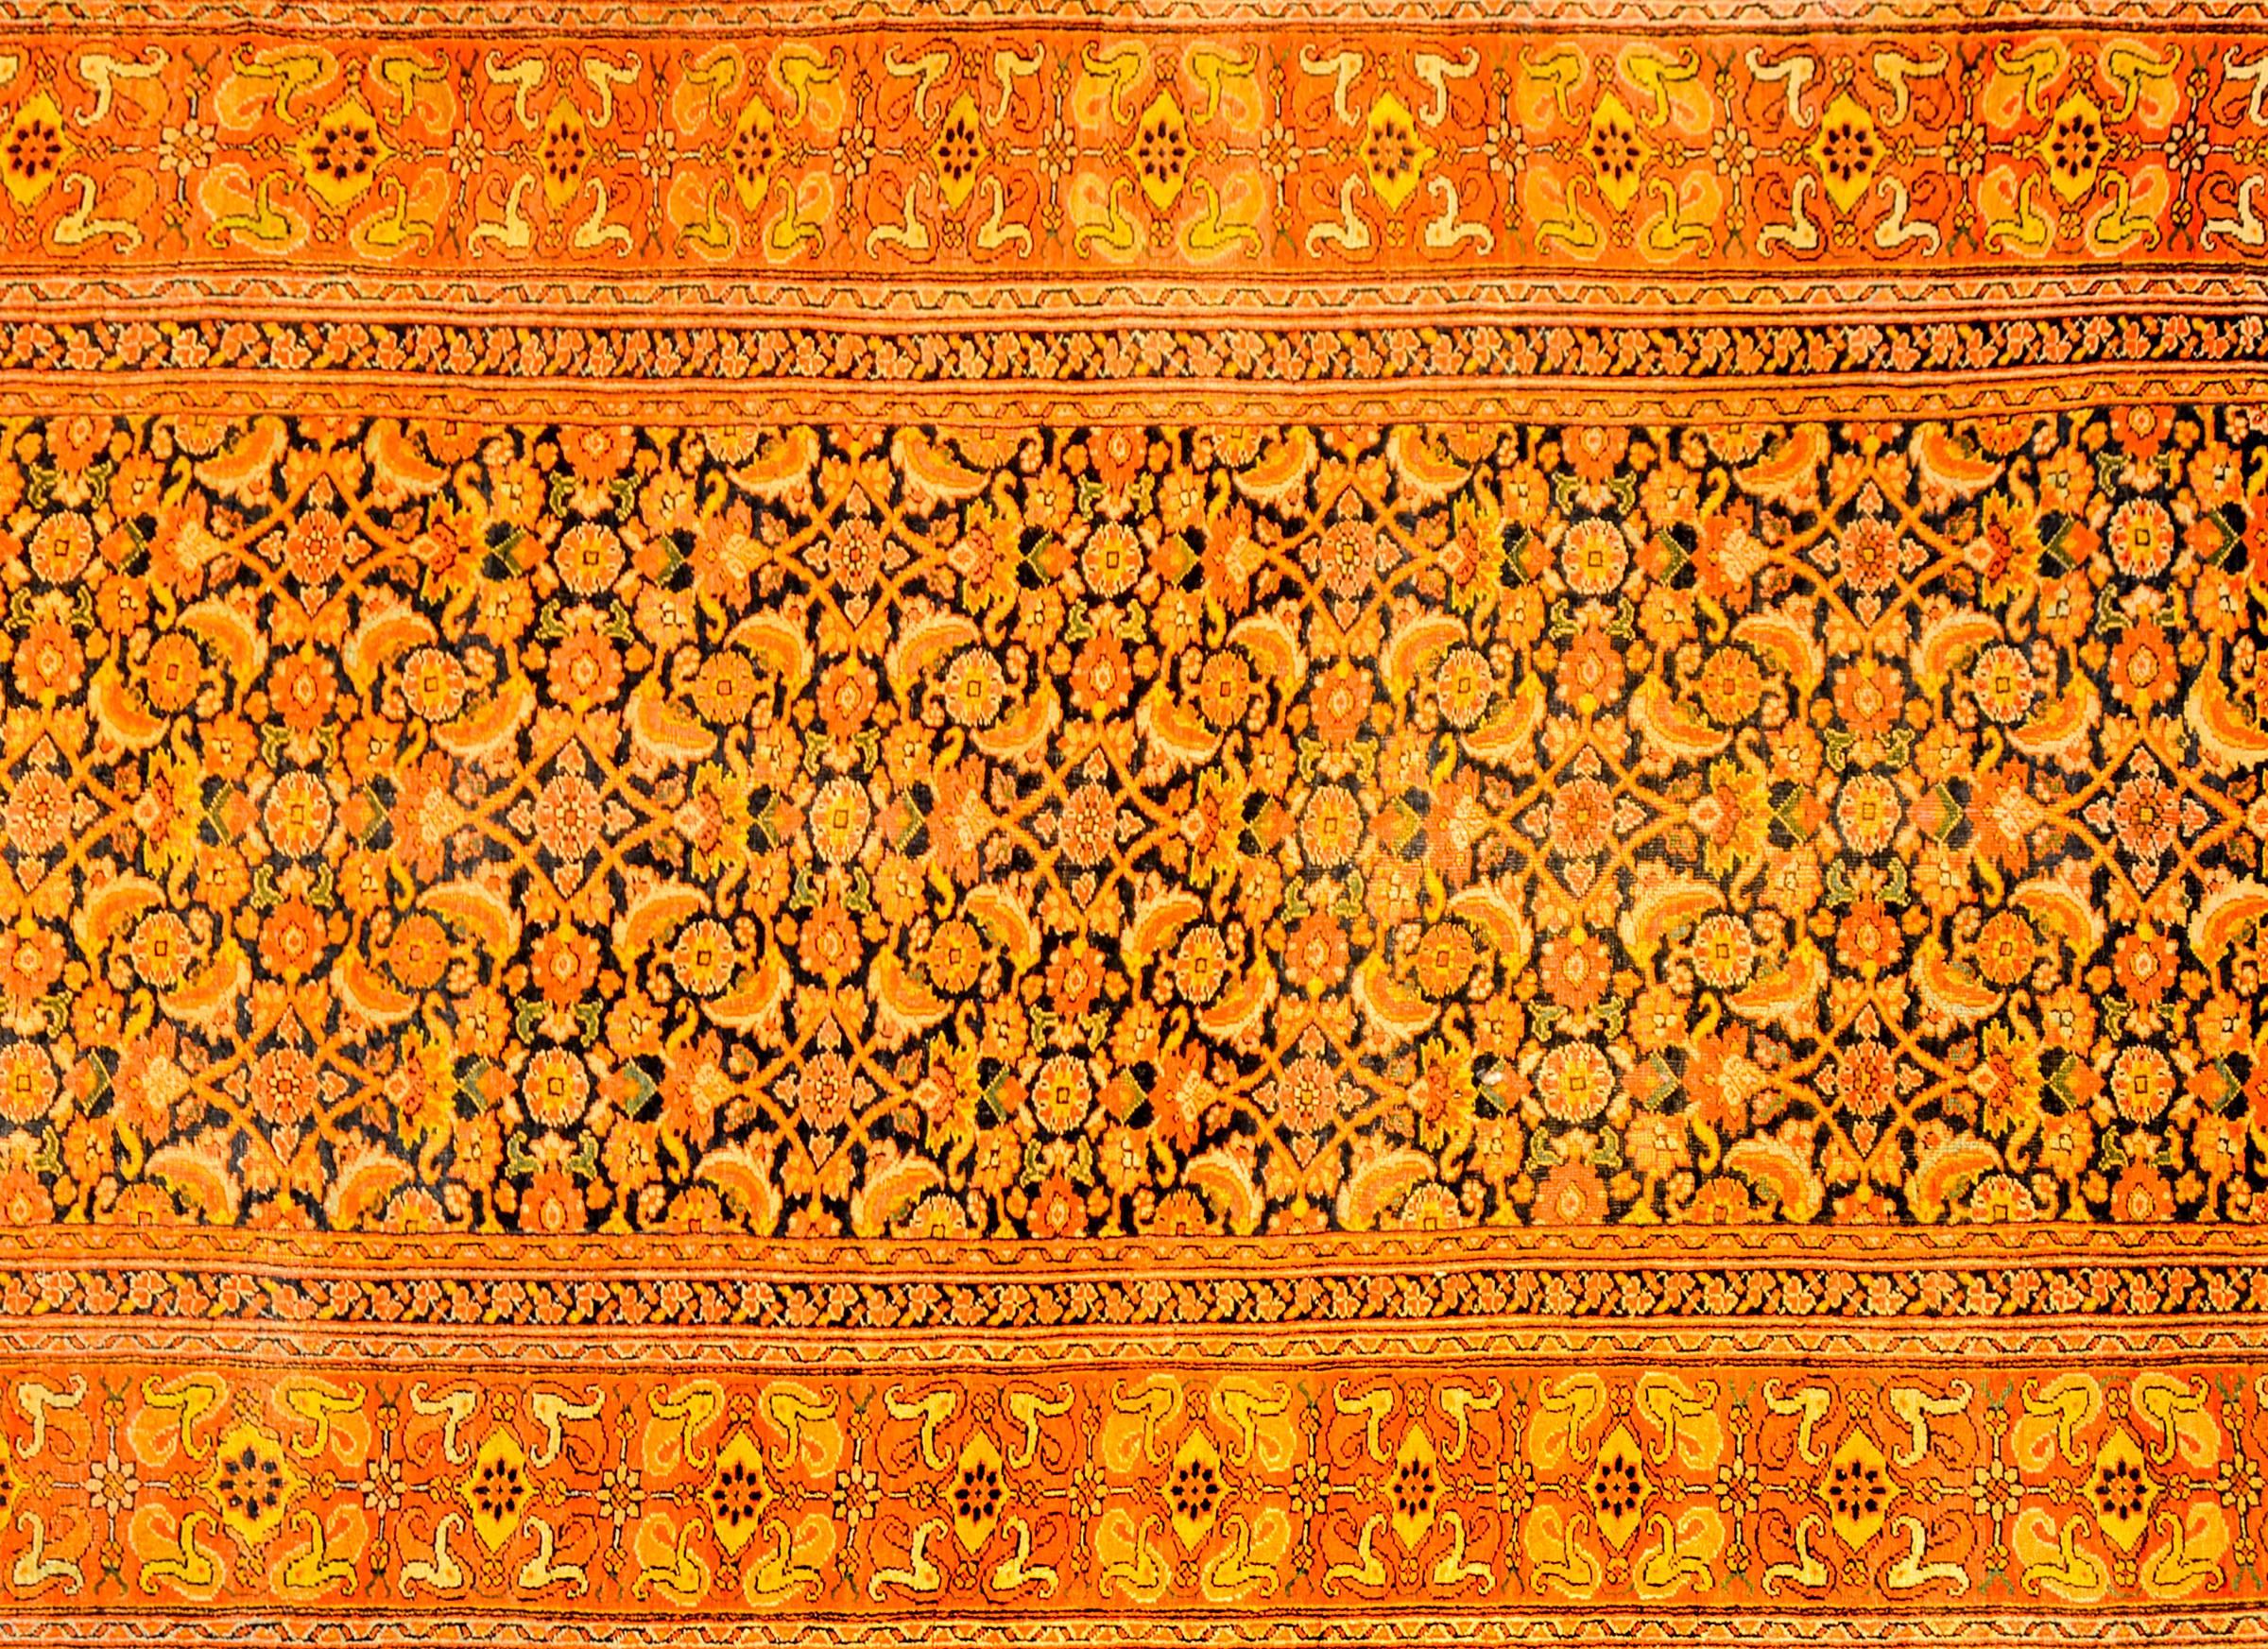 A wonderful early 20th century Persian Bidjar rug with an all-over lattice floral pattern woven in orange, crimson, gold, and indigo, on a beautiful indigo background. The border is amazing, composed of multiple floral patterned stripes.